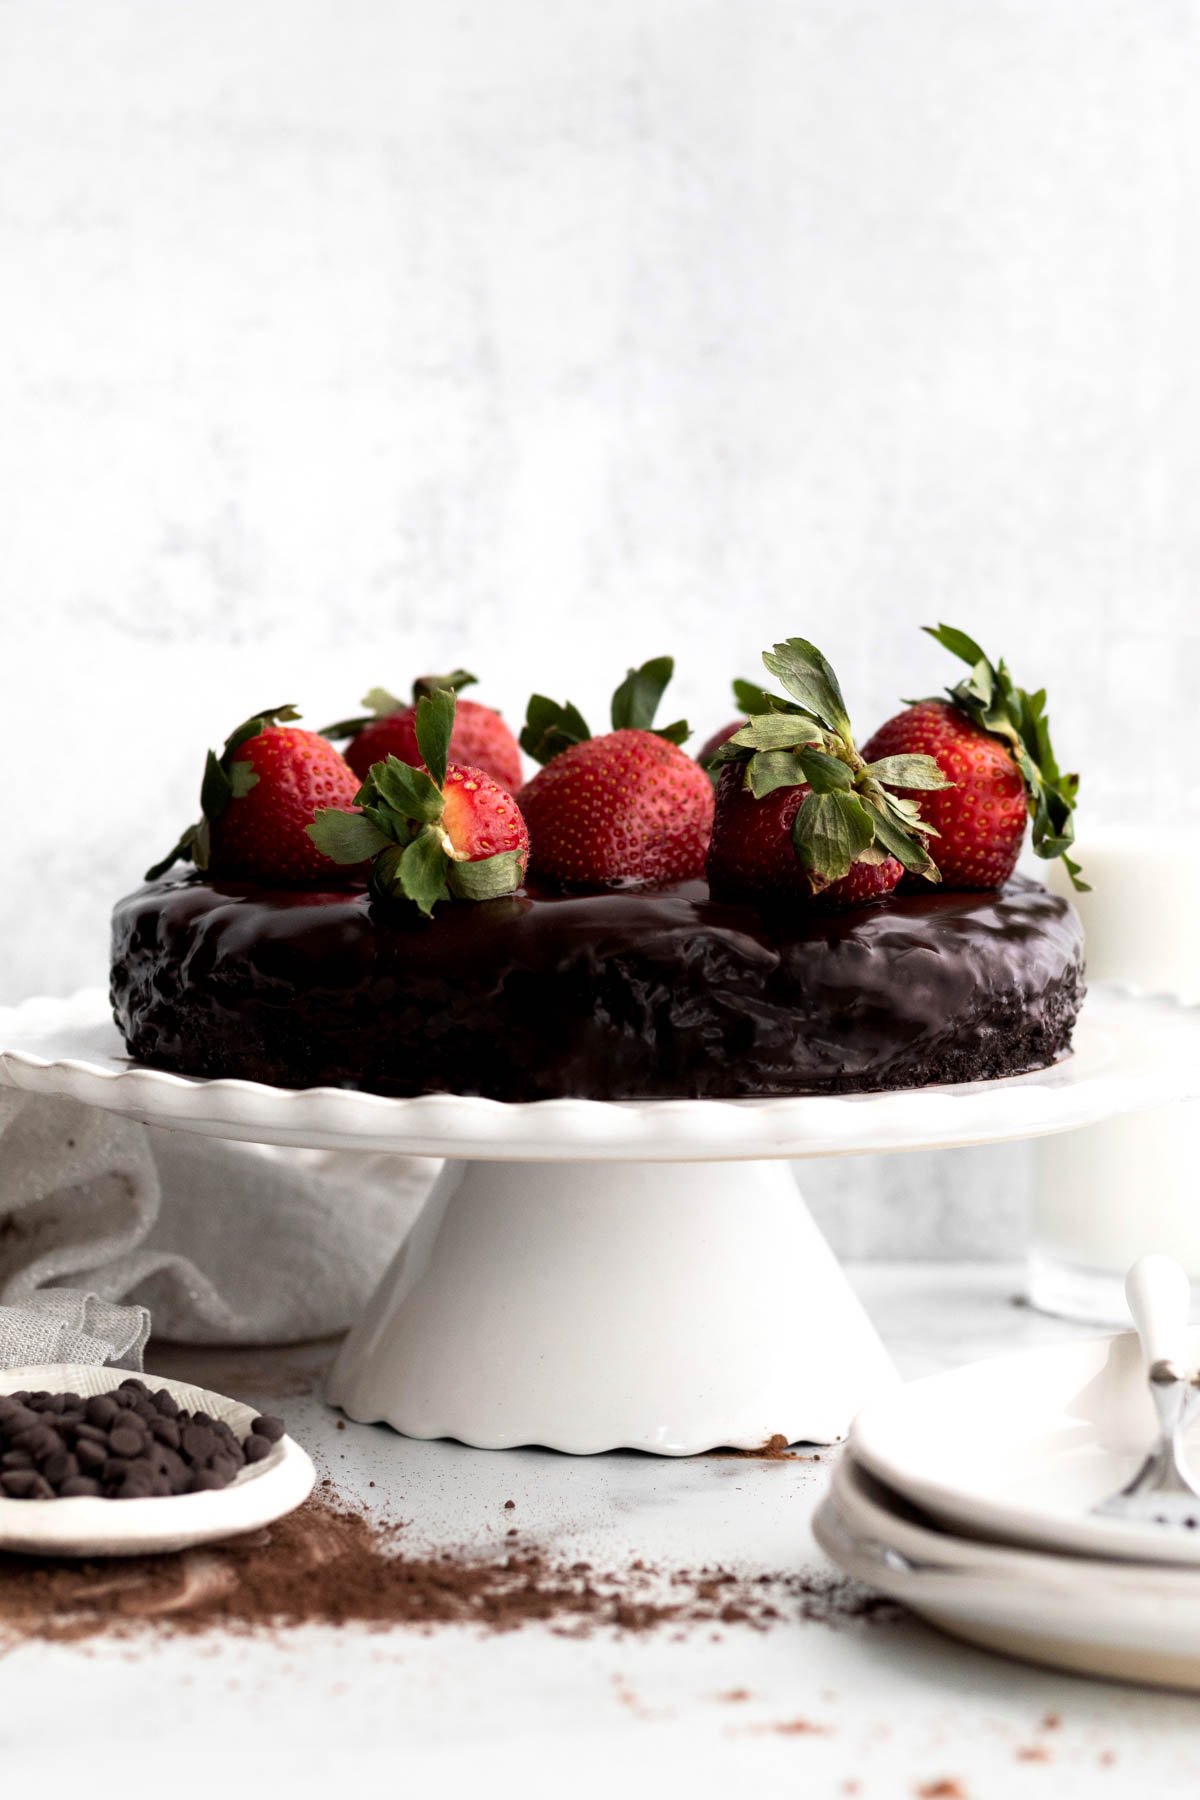 Rich delicious vegan flourless cake on a cake stand with strawberries.